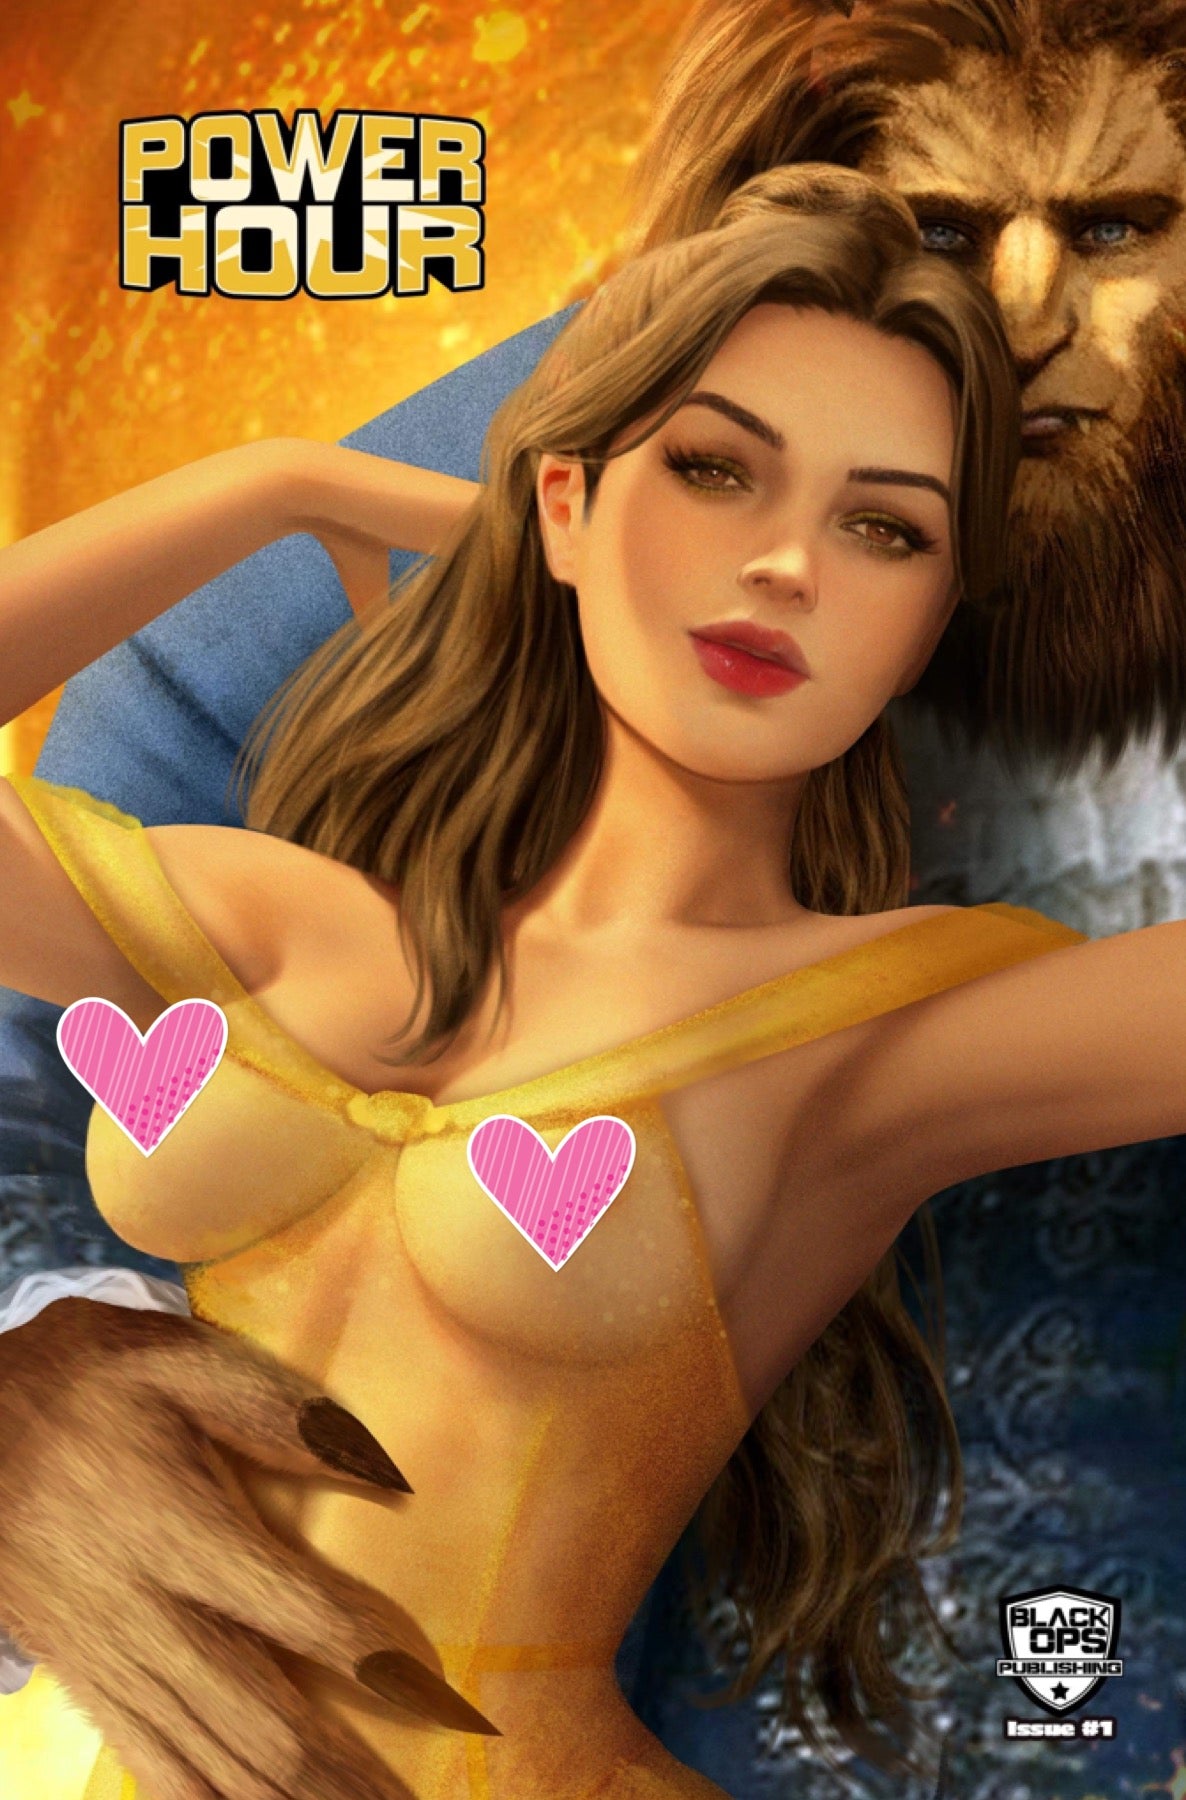 POWER HOUR BELLE COSPLAY EXCLUSIVE VARIANT COVERS